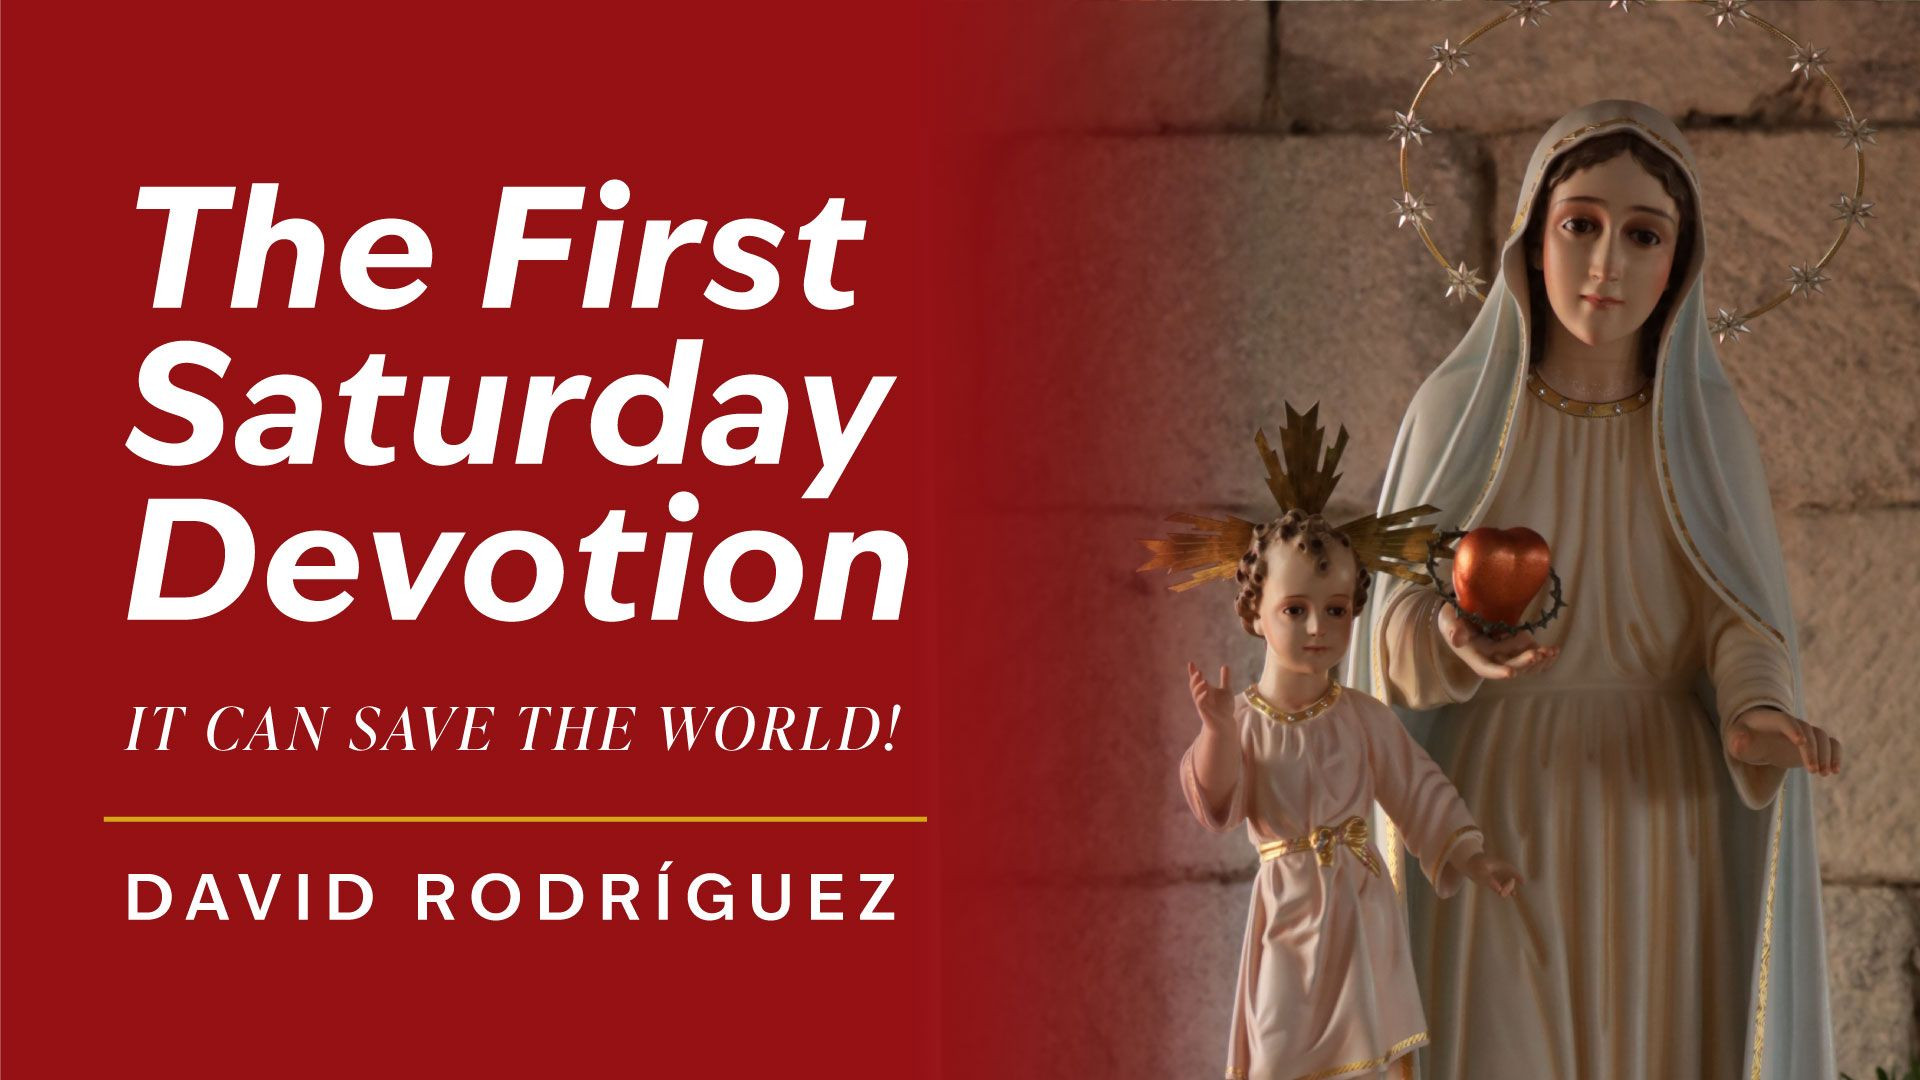 The First Saturday: It Can Save the World by David Rodríguez